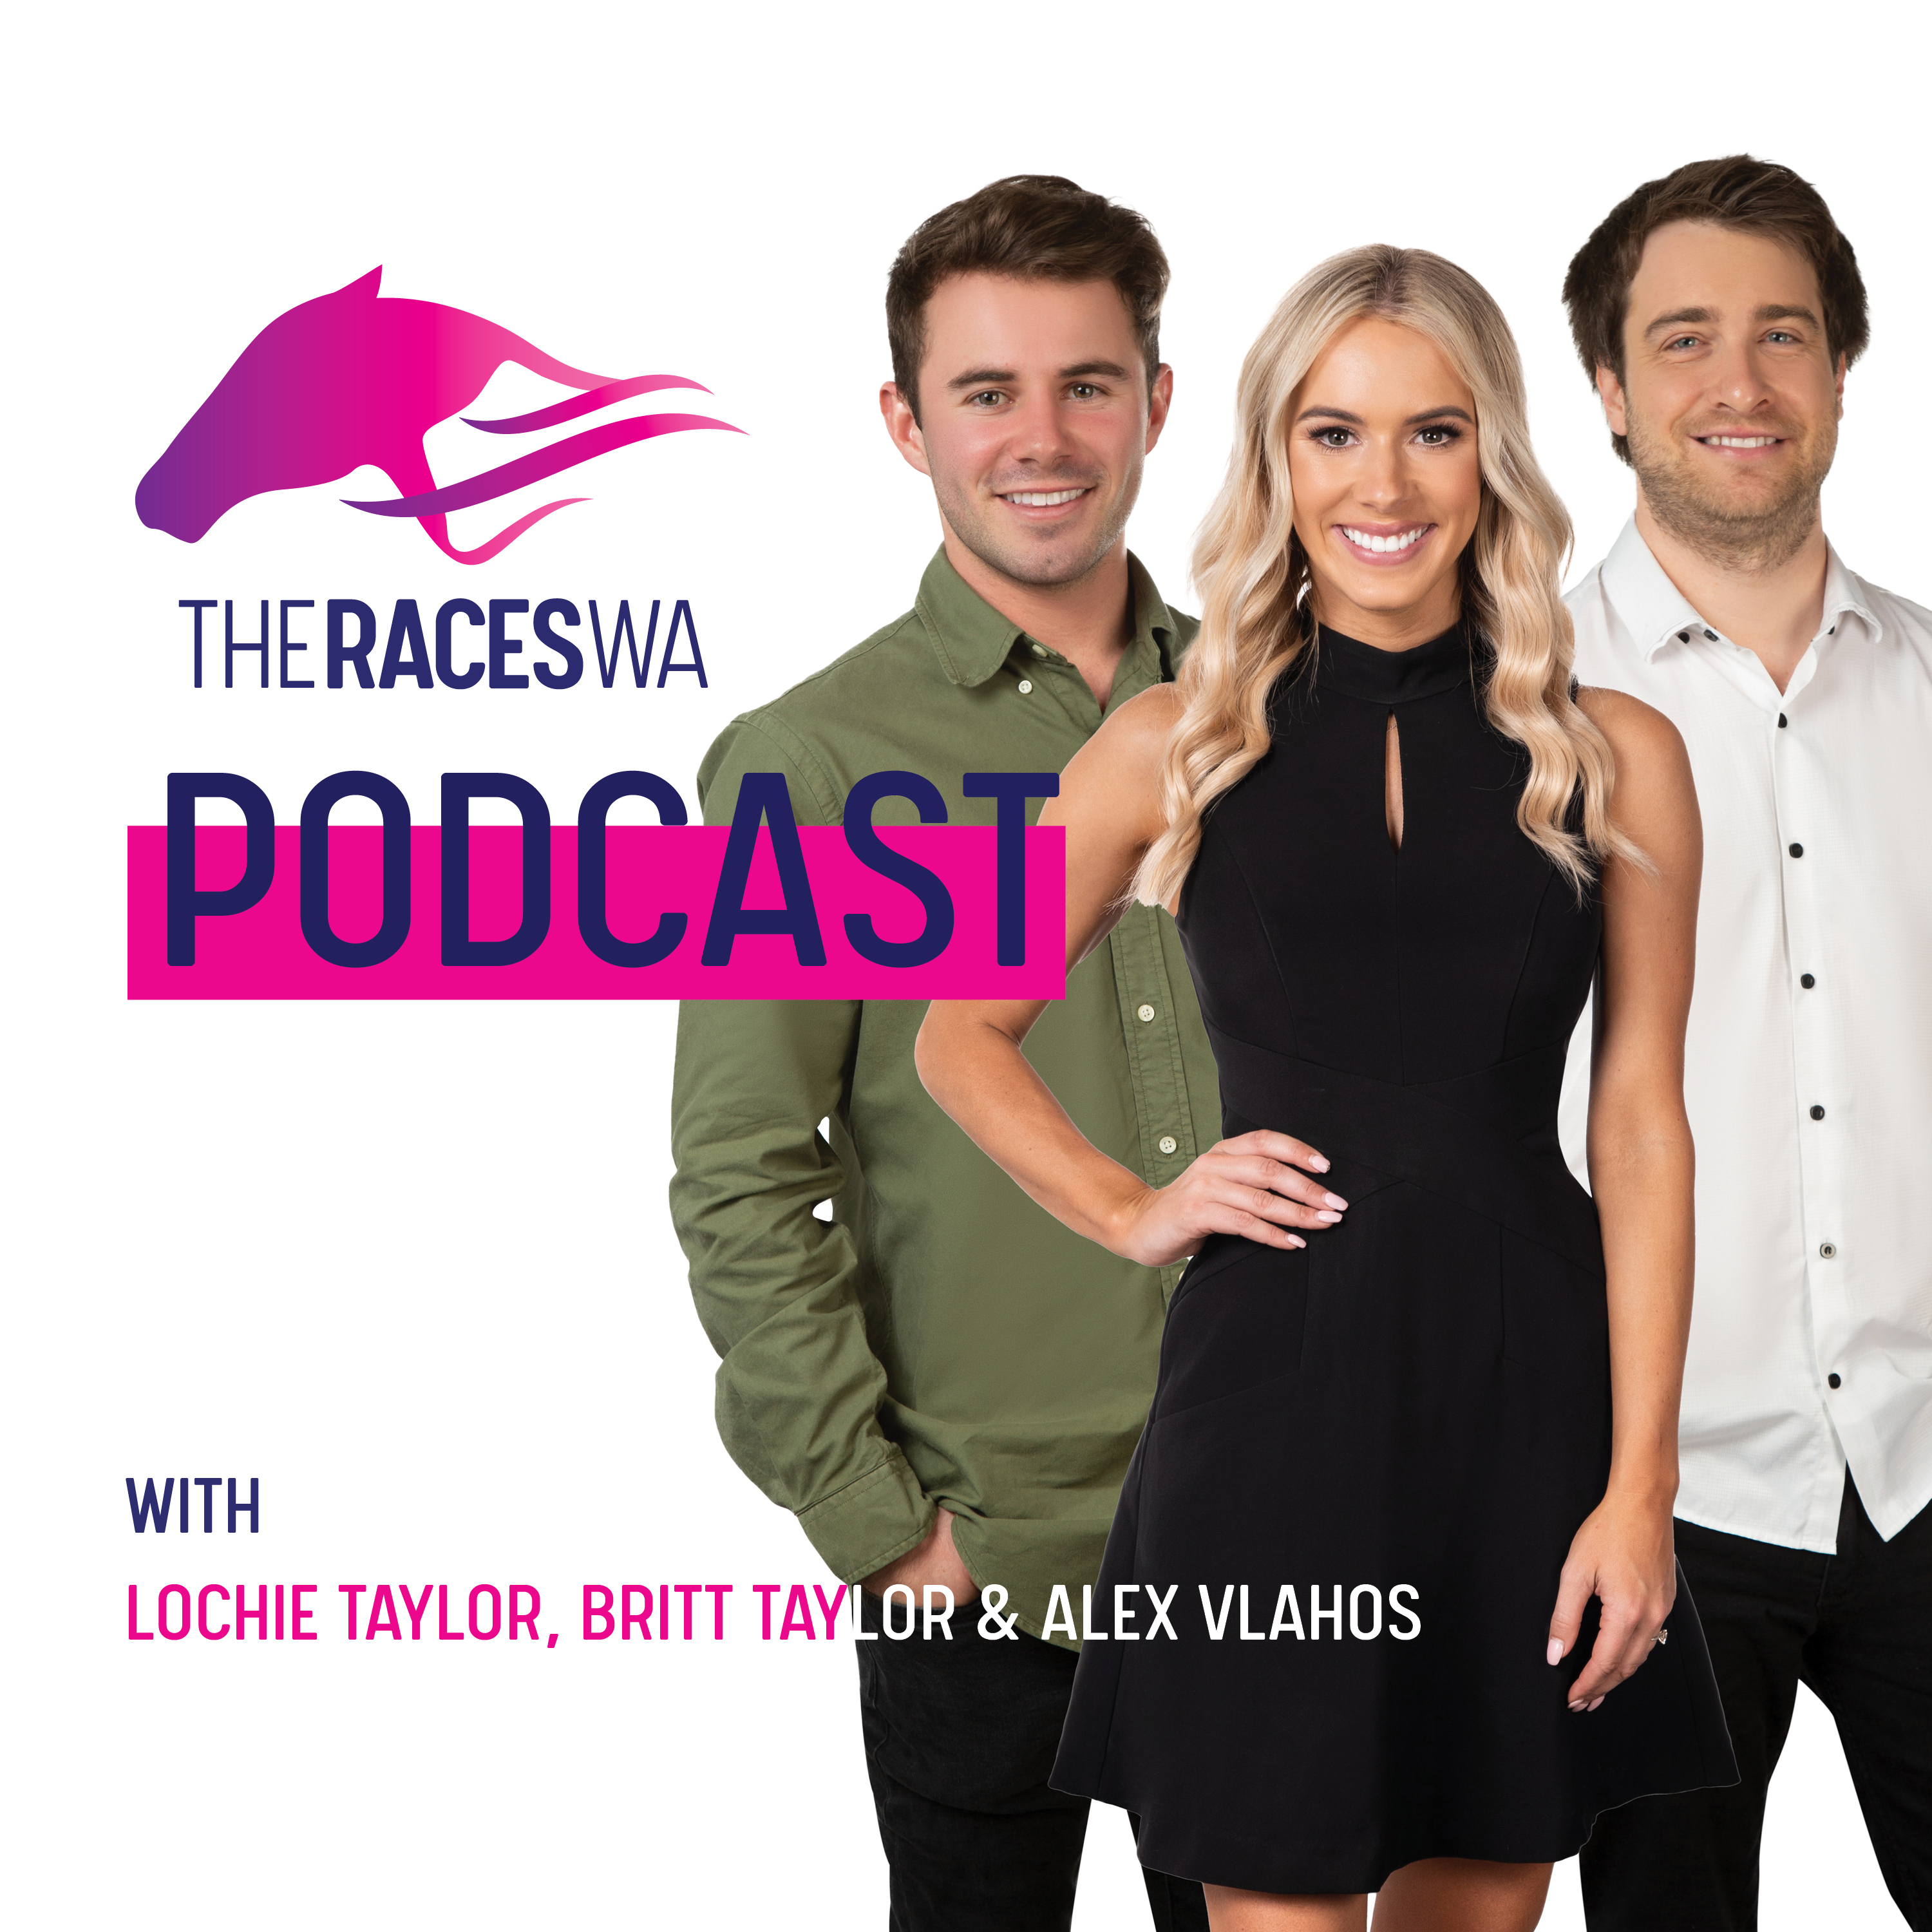 Western Empire Strikes Back, Is The Bool On The Bucket List, Should Jockeys Be Allowed To Bet, Is It Pike's Premiership, Heartwarming Josh Parr Audio, Getting To Know Michael Heaton